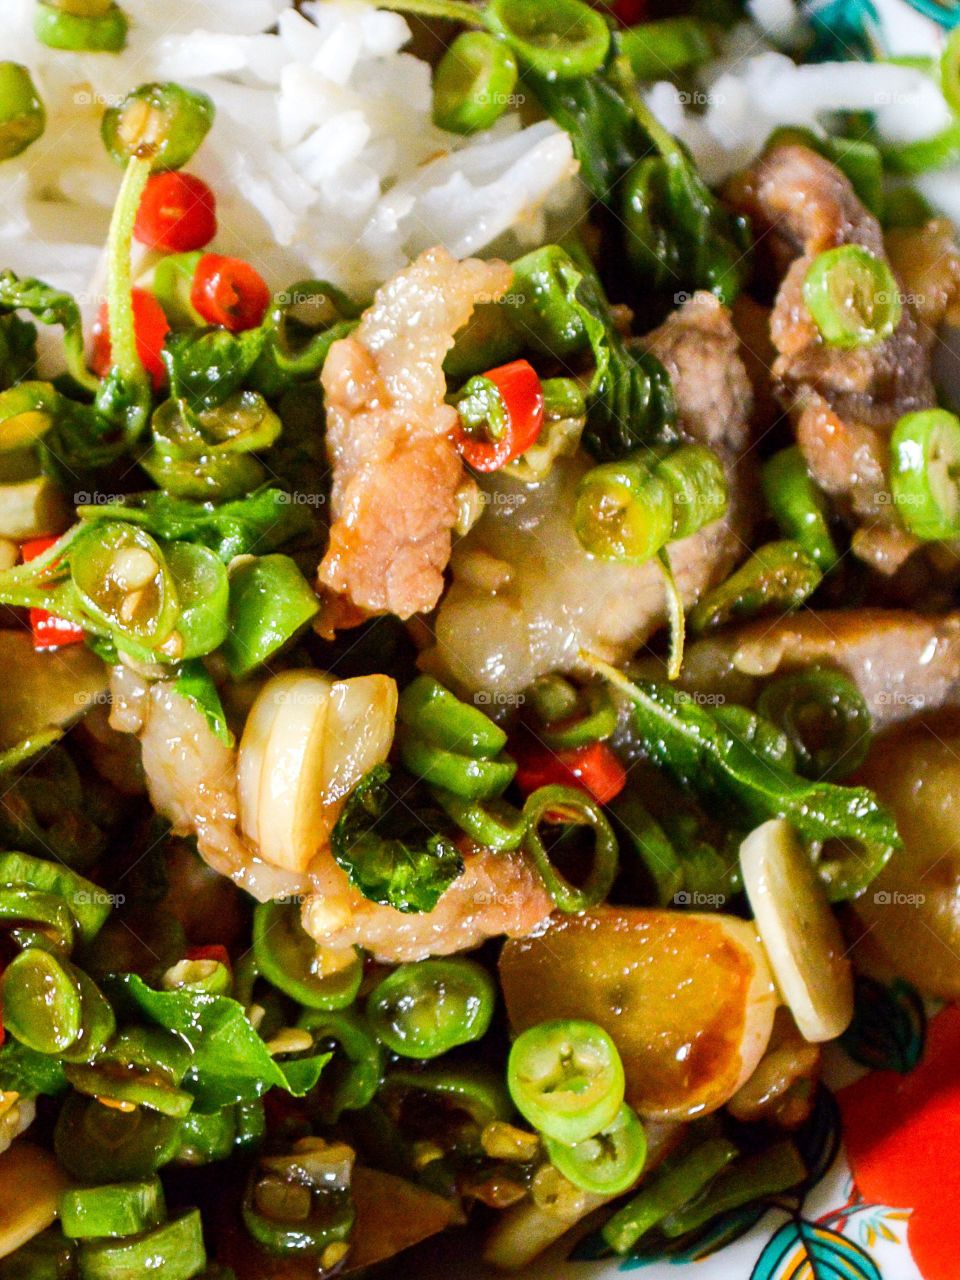 spicy pork and basil leaves fried. thailand healthy food